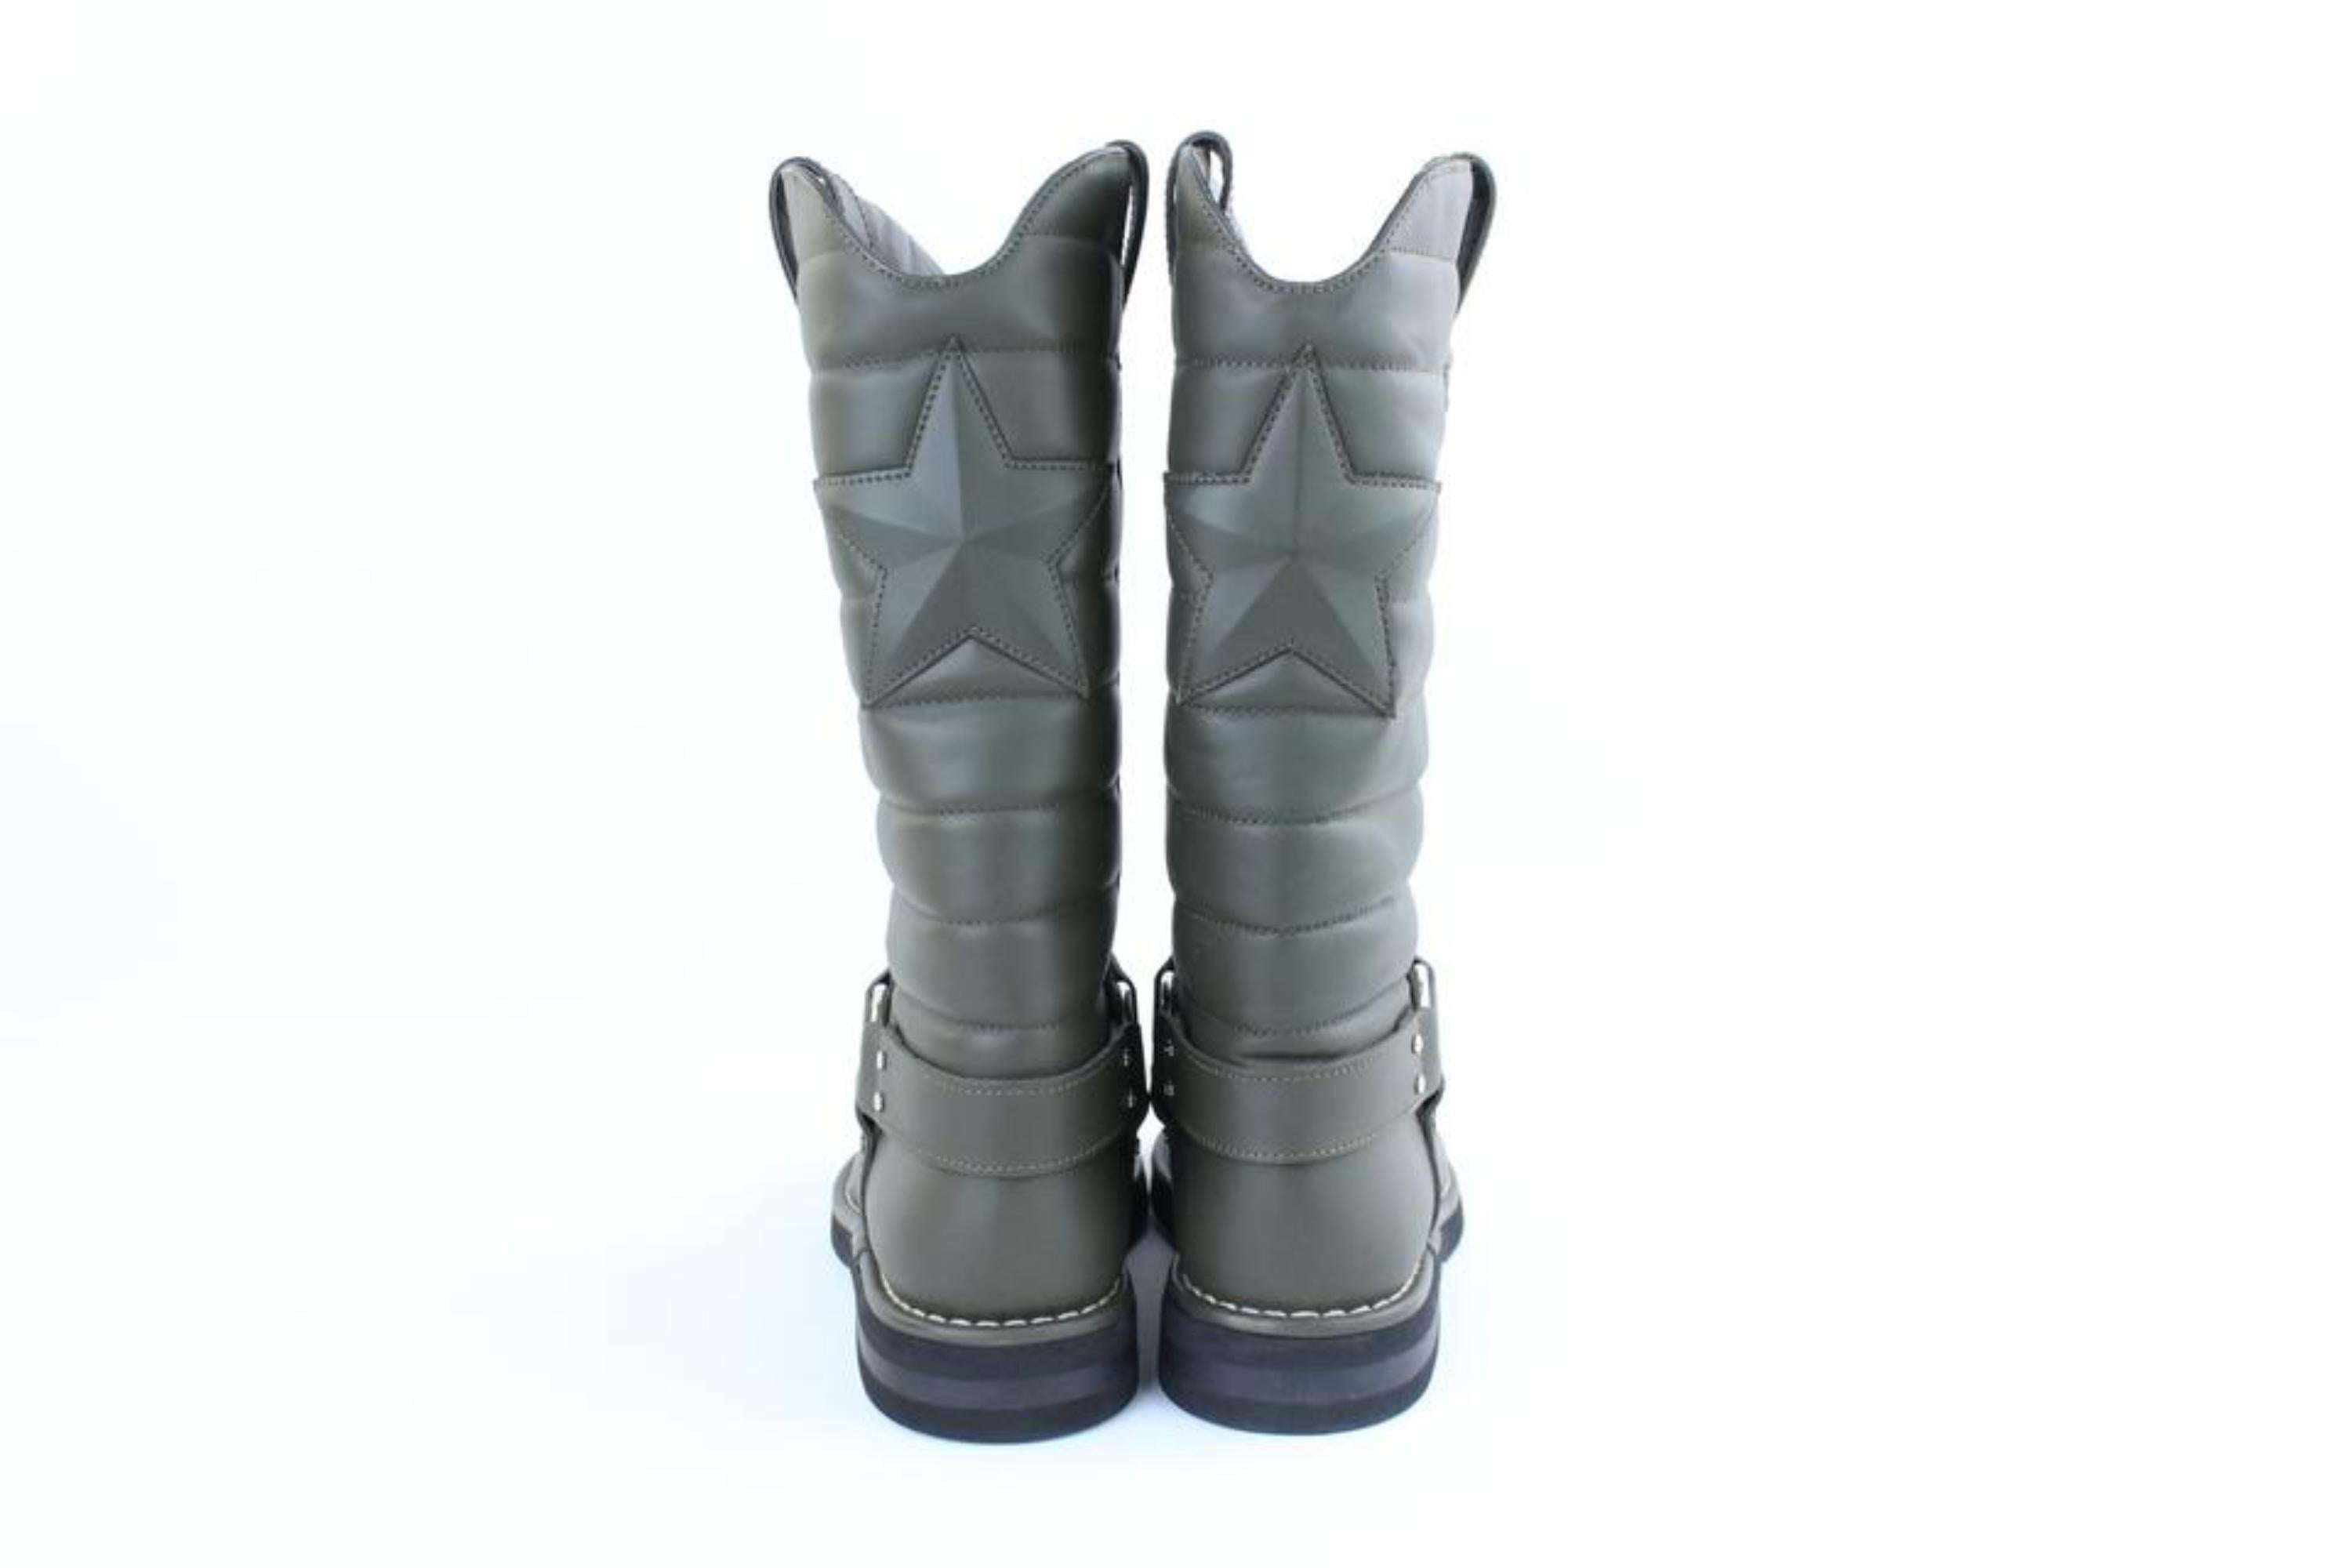 Chanel Khaki 14a Quilted Leather Star Harness Motorcycle 6cj1016  Boots/Booties For Sale 4